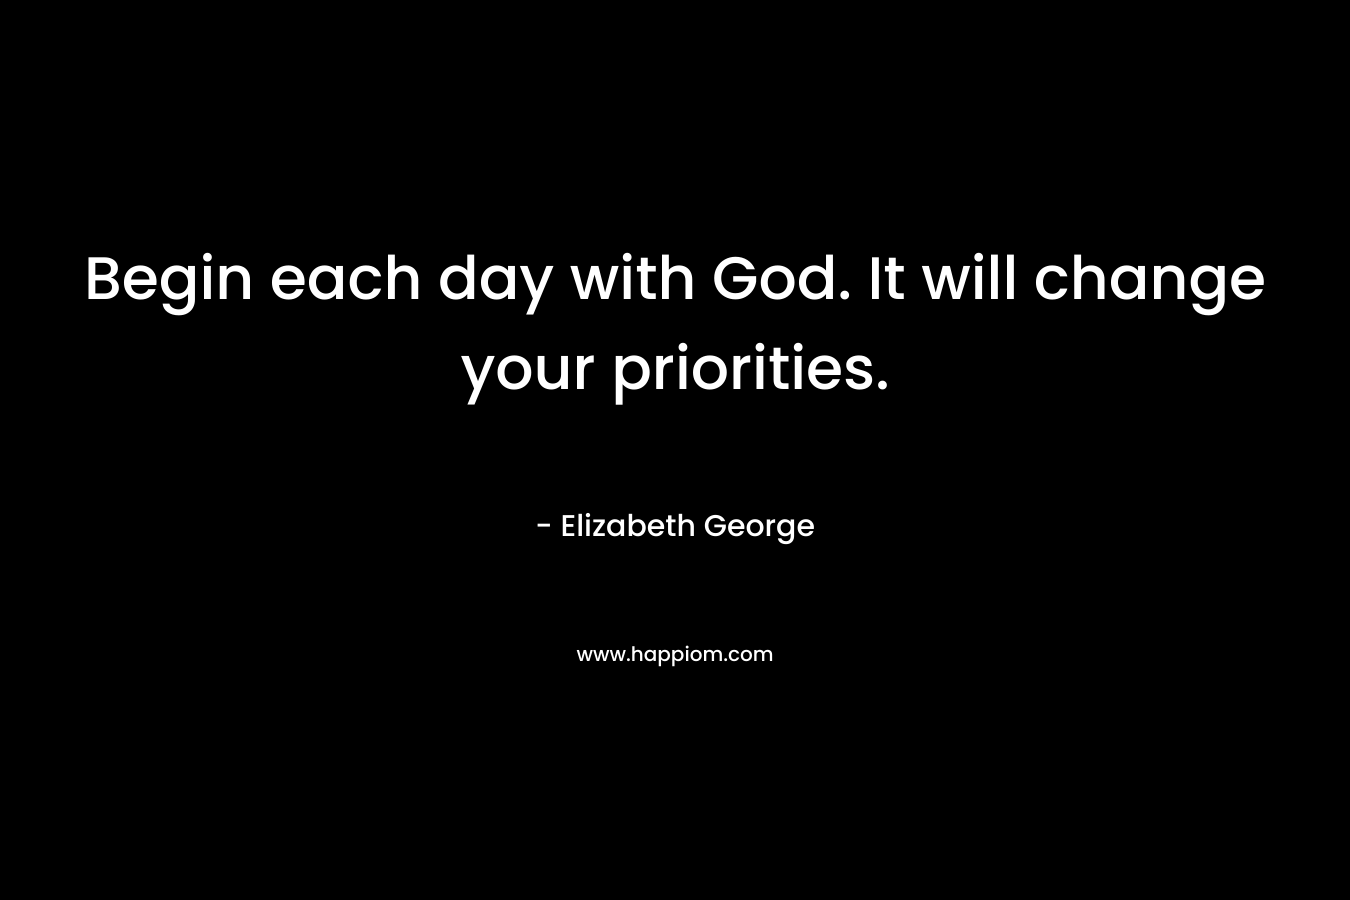 Begin each day with God. It will change your priorities.